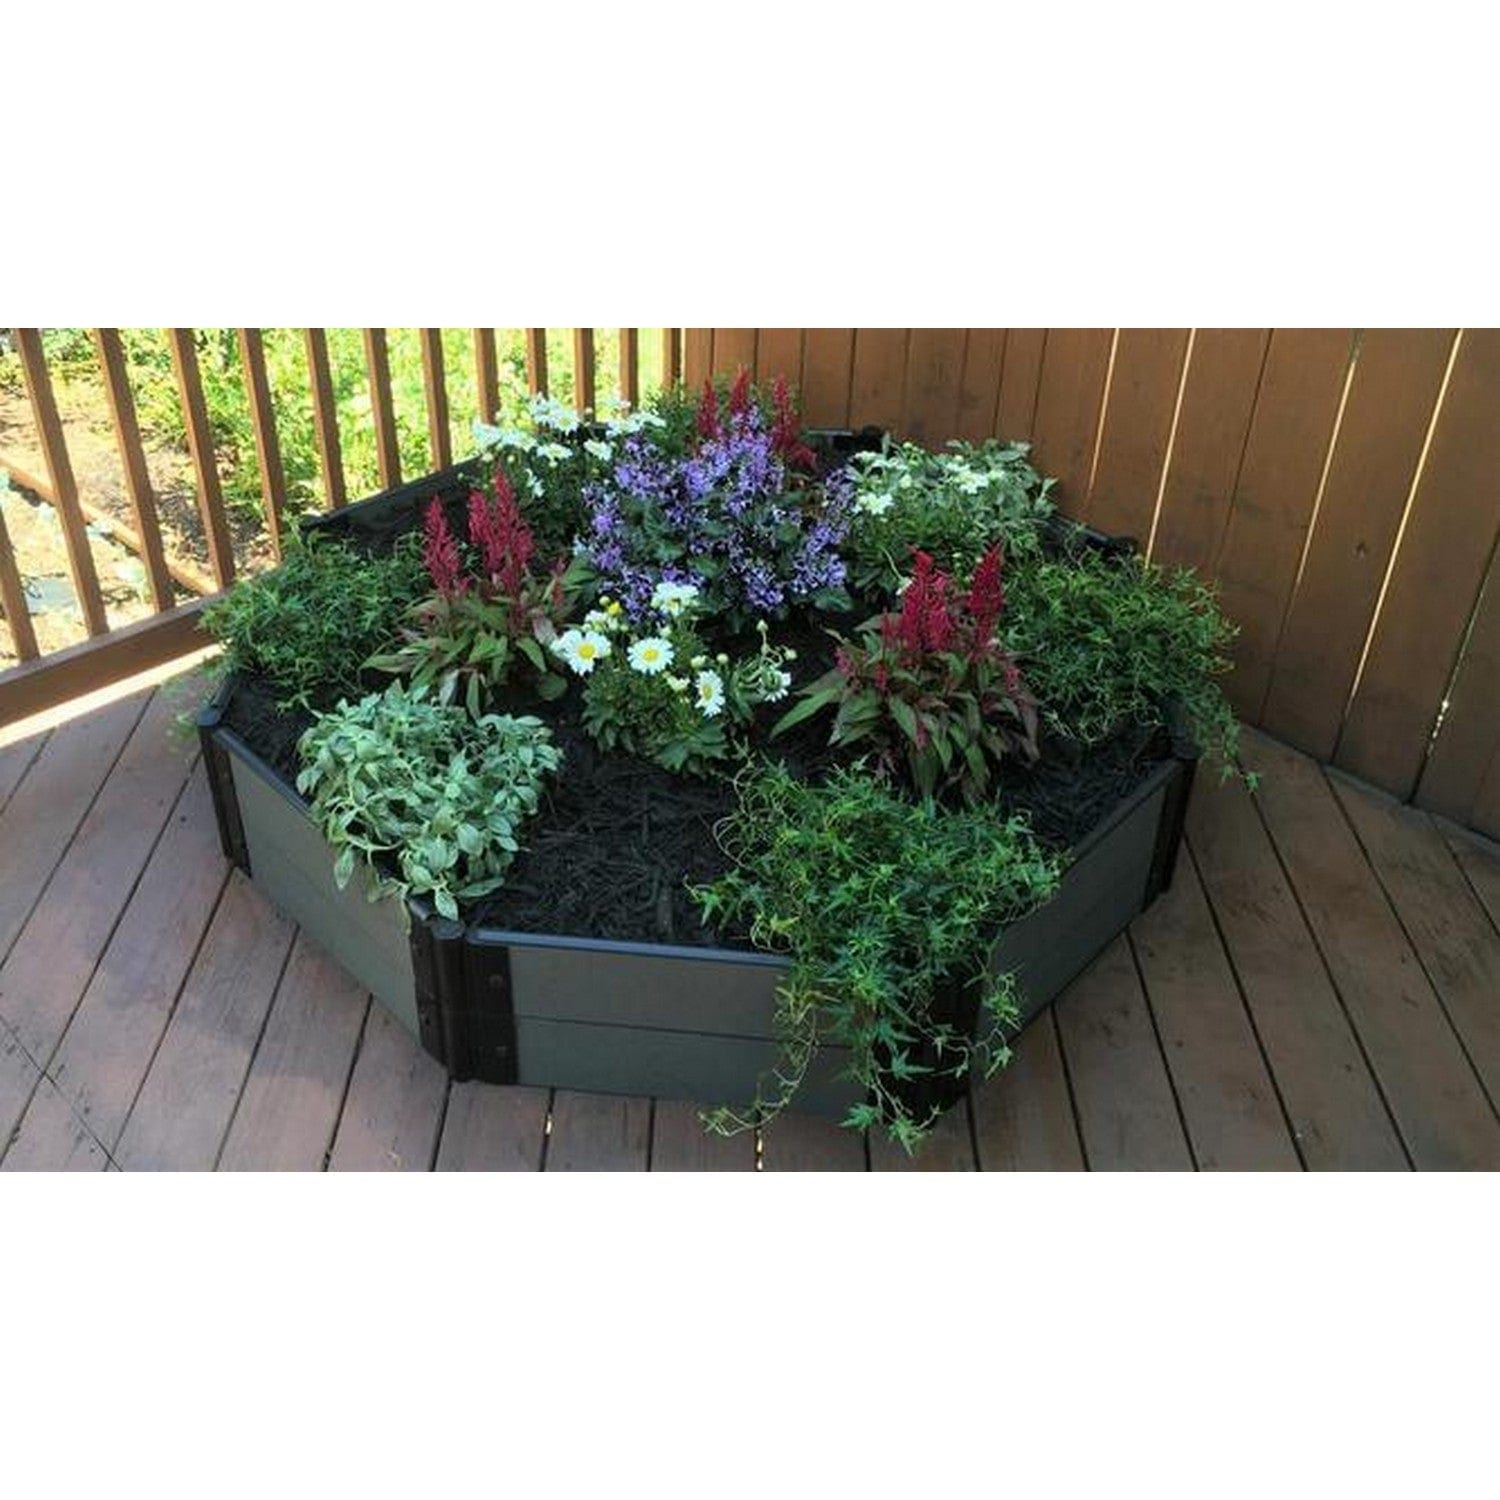 Frame It All Gardening Accessories Frame It All | Tool-Free St. John Baptistry Raised Garden Bed (Octagon) 5' X 5' X 11" - Classic Sienna - 2" Profile 200002462